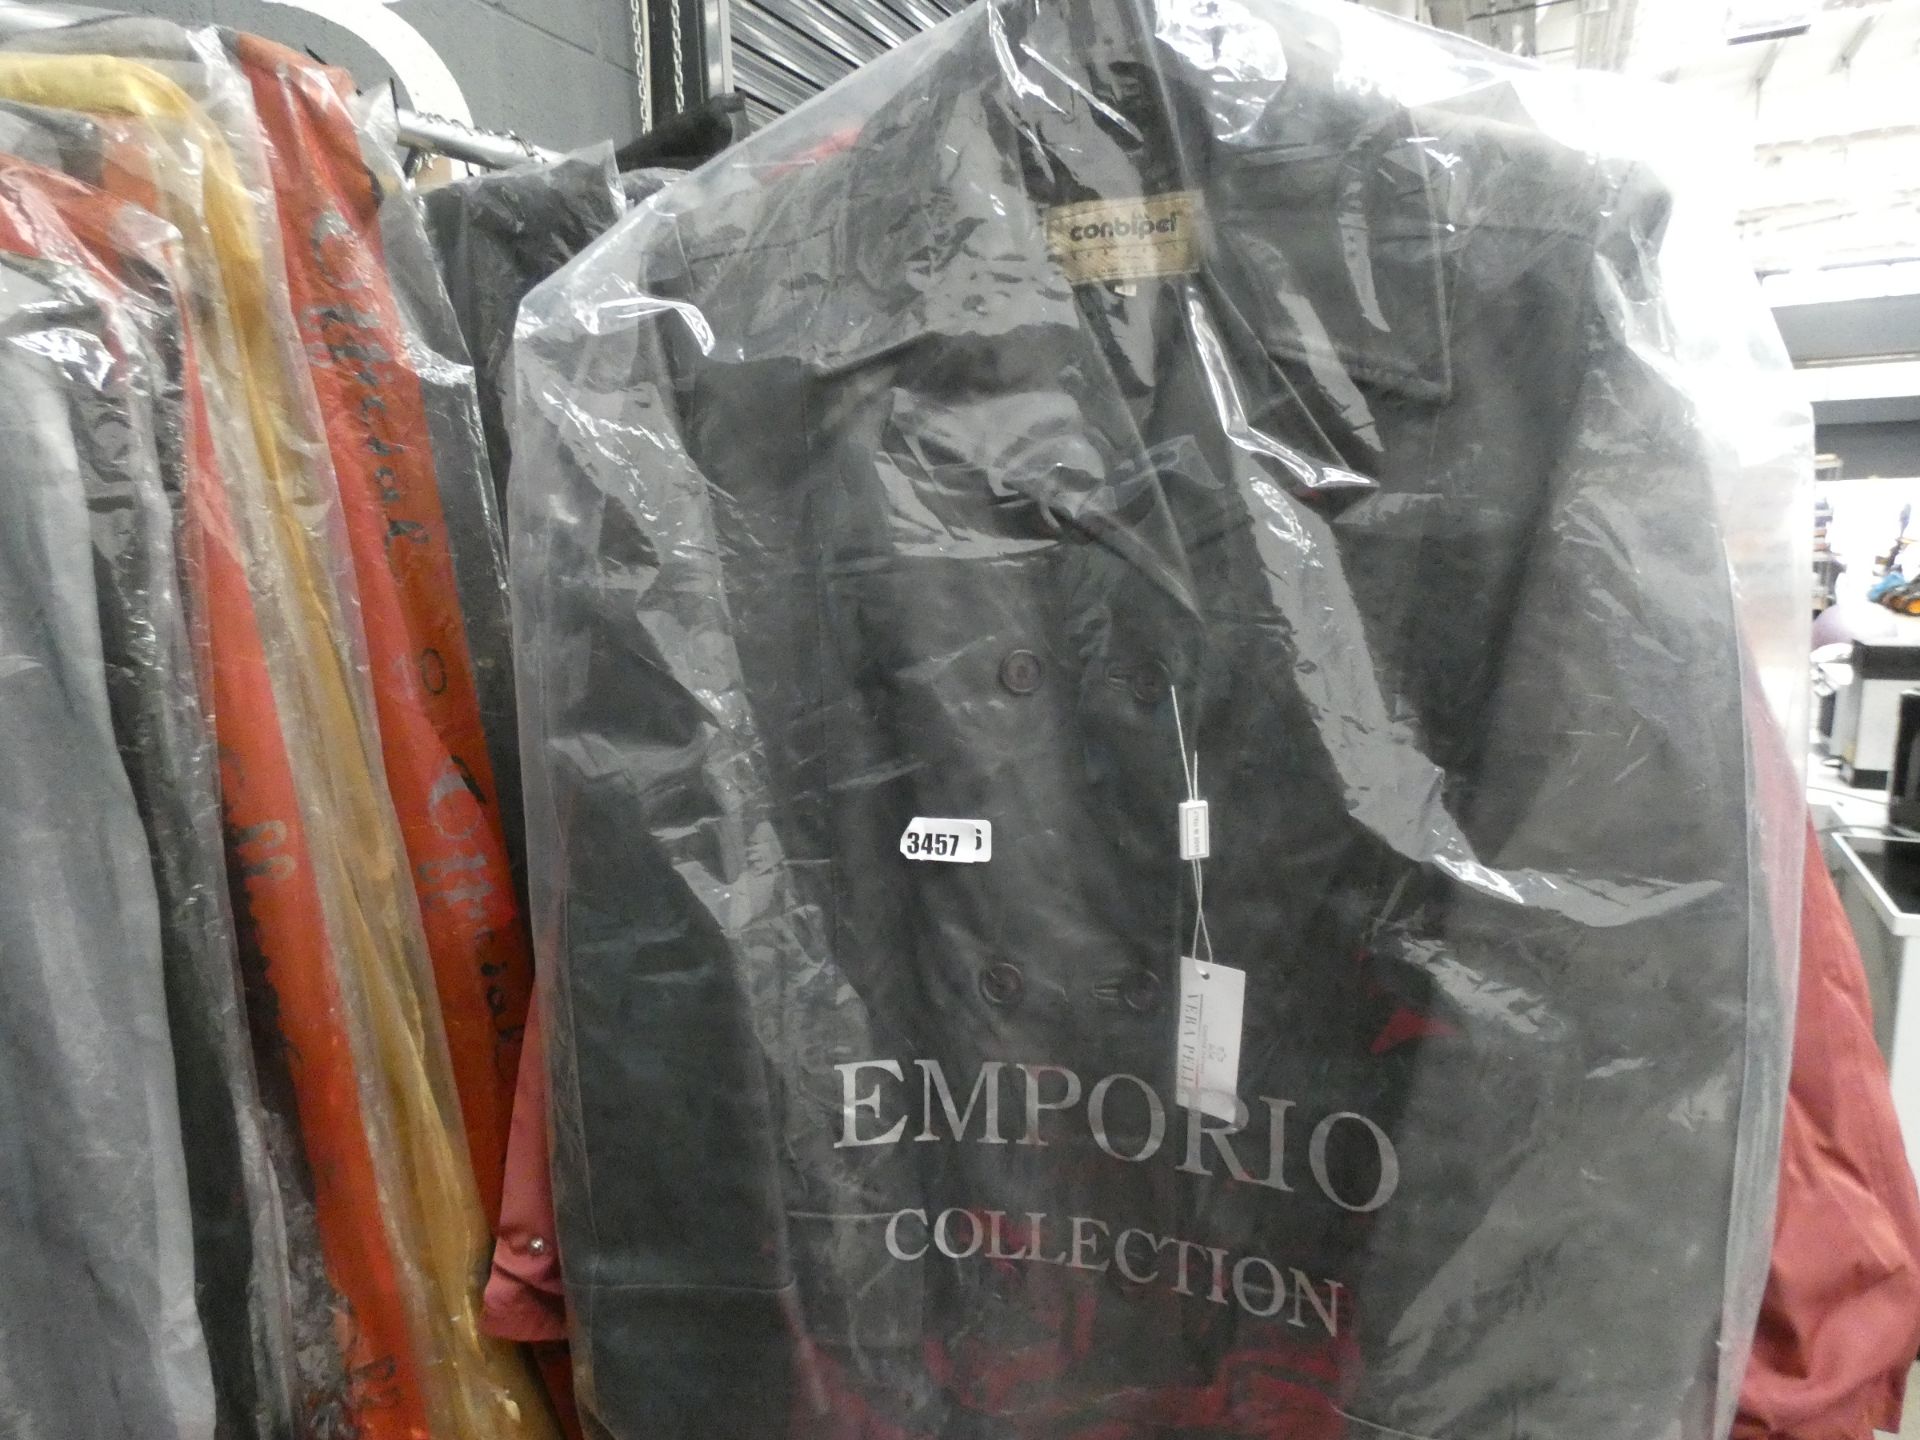 3556 Emporio Collection men's leather jacket, size 48